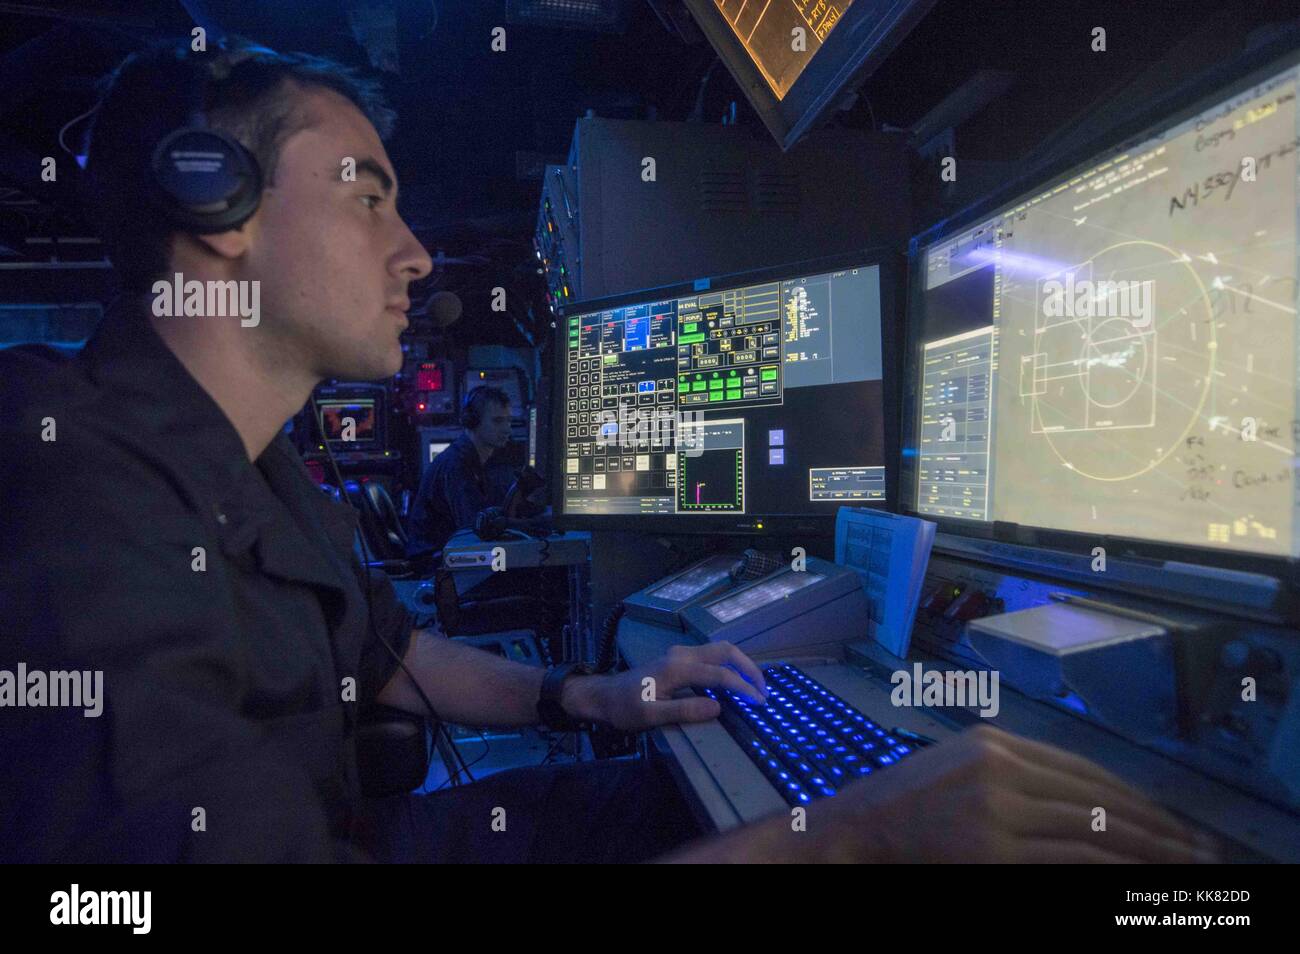 Lt jg Michael Cornish, from Omaha, Neb, stands watch in the combat information center aboard the guided-missile cruiser USS Normandy CG 60 during an air-defense exercise as a part of the joint exercise Malabar 2015, U.S. 7Th Fleet Area Of Operations. Image courtesy Mass Communication Specialist 3rd Class Justin R. DiNiro/US Navy, 2015. Stock Photo